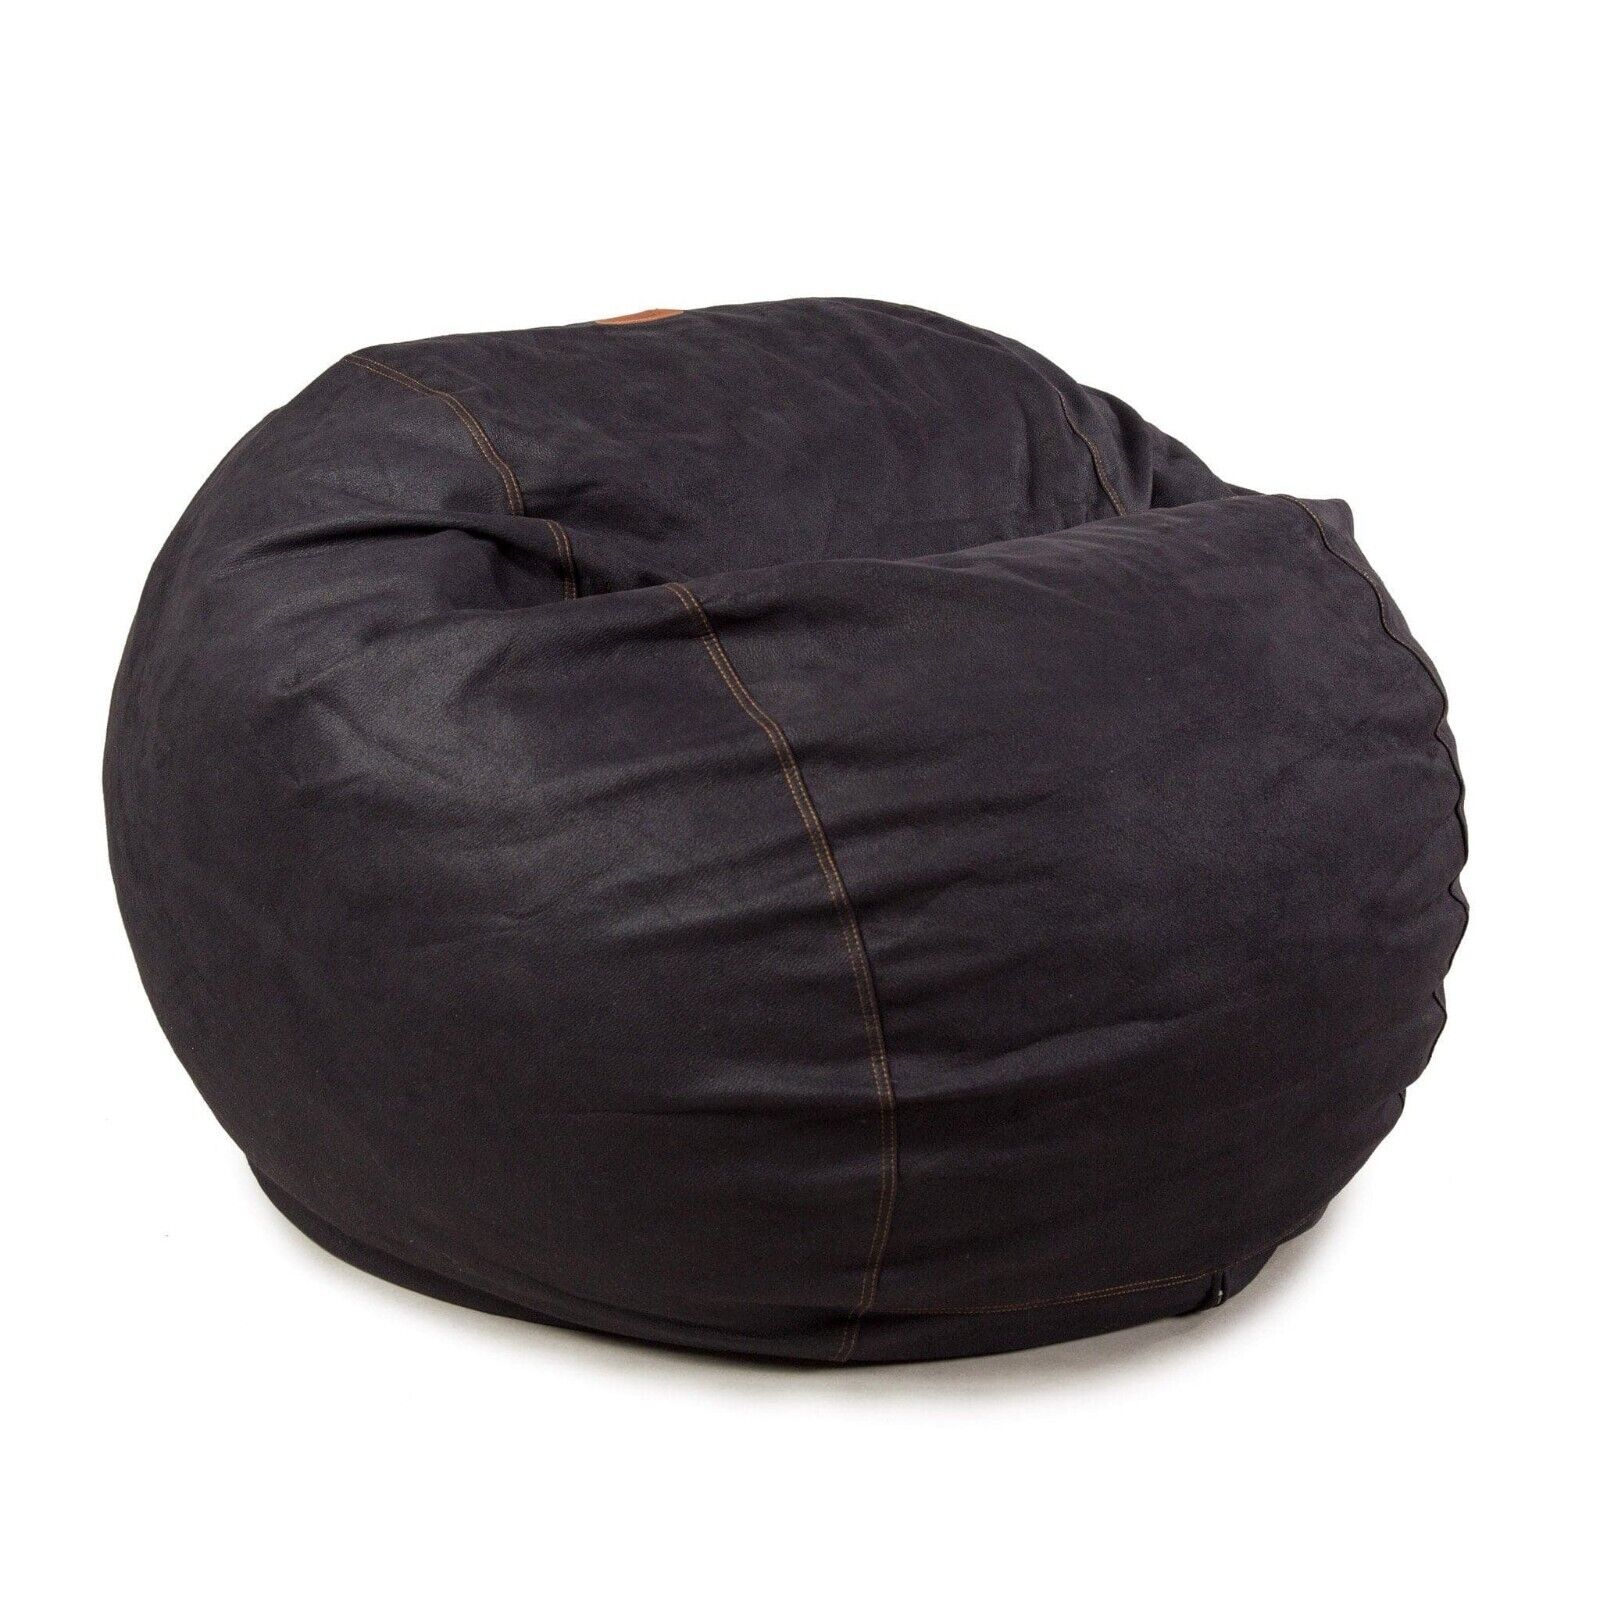 CordaRoy\'s Bean Bag  Queen Size  Faux Leather